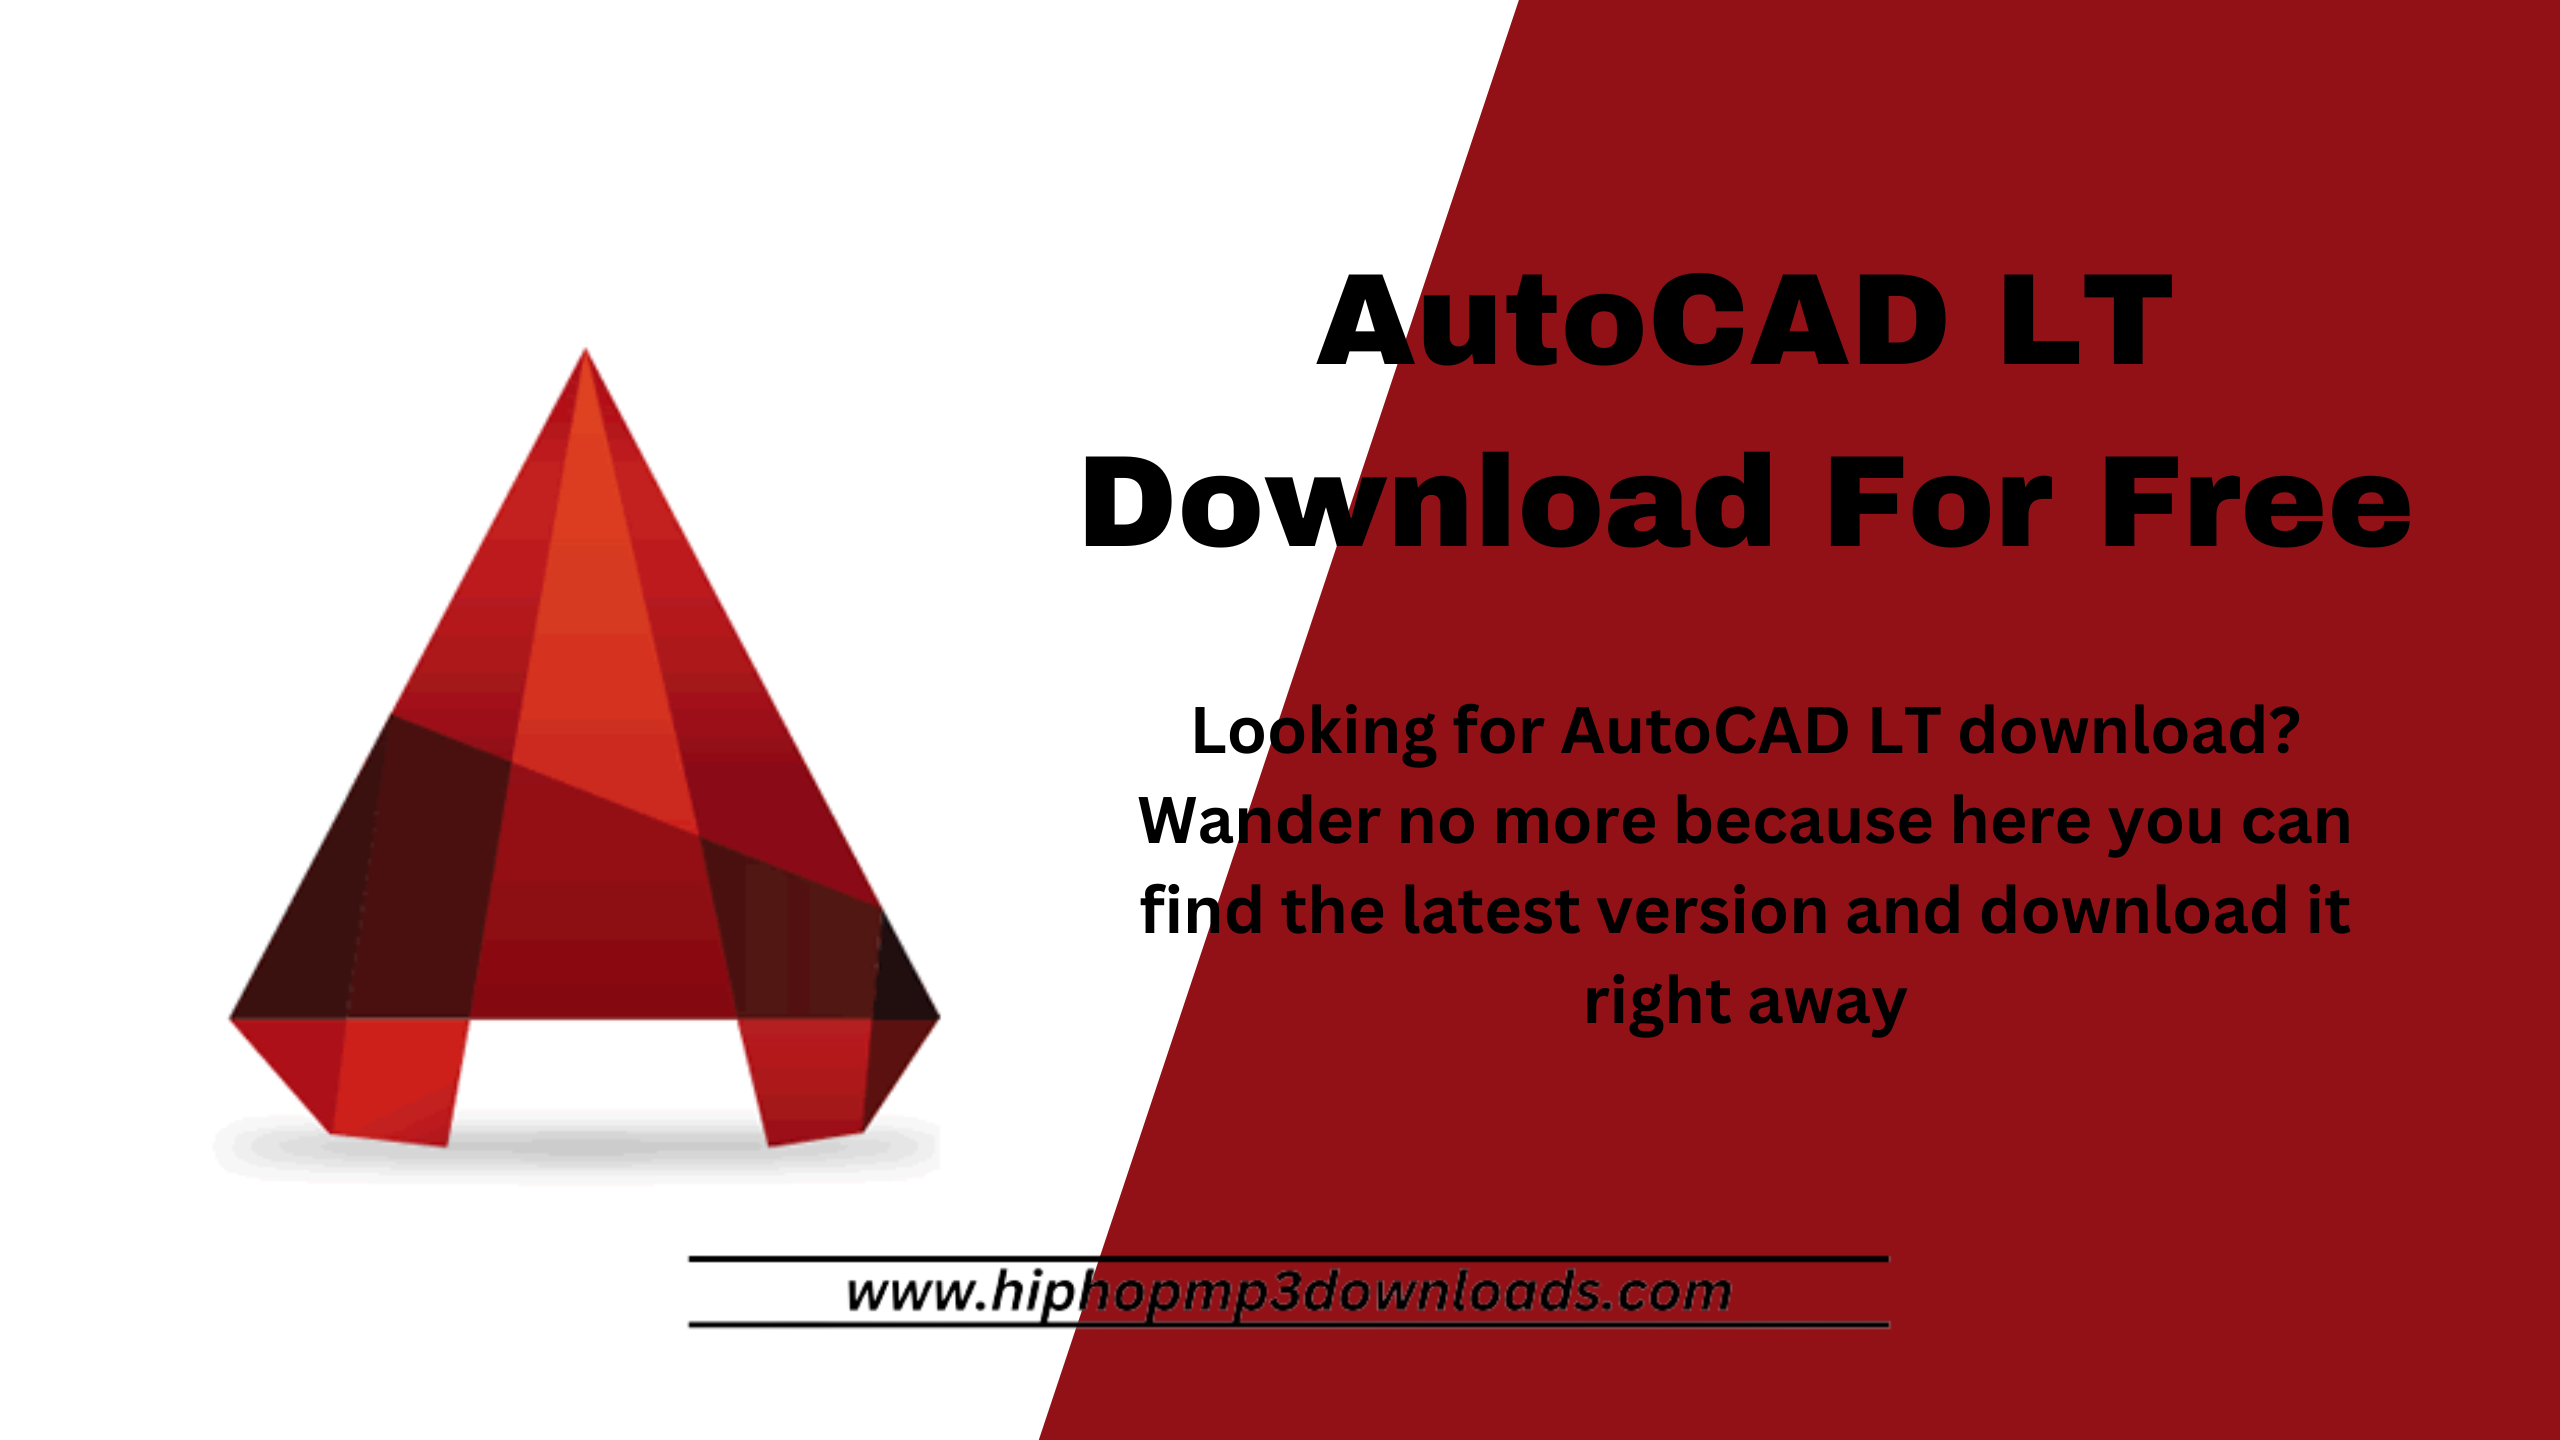 AutoCAD LT Download For Free